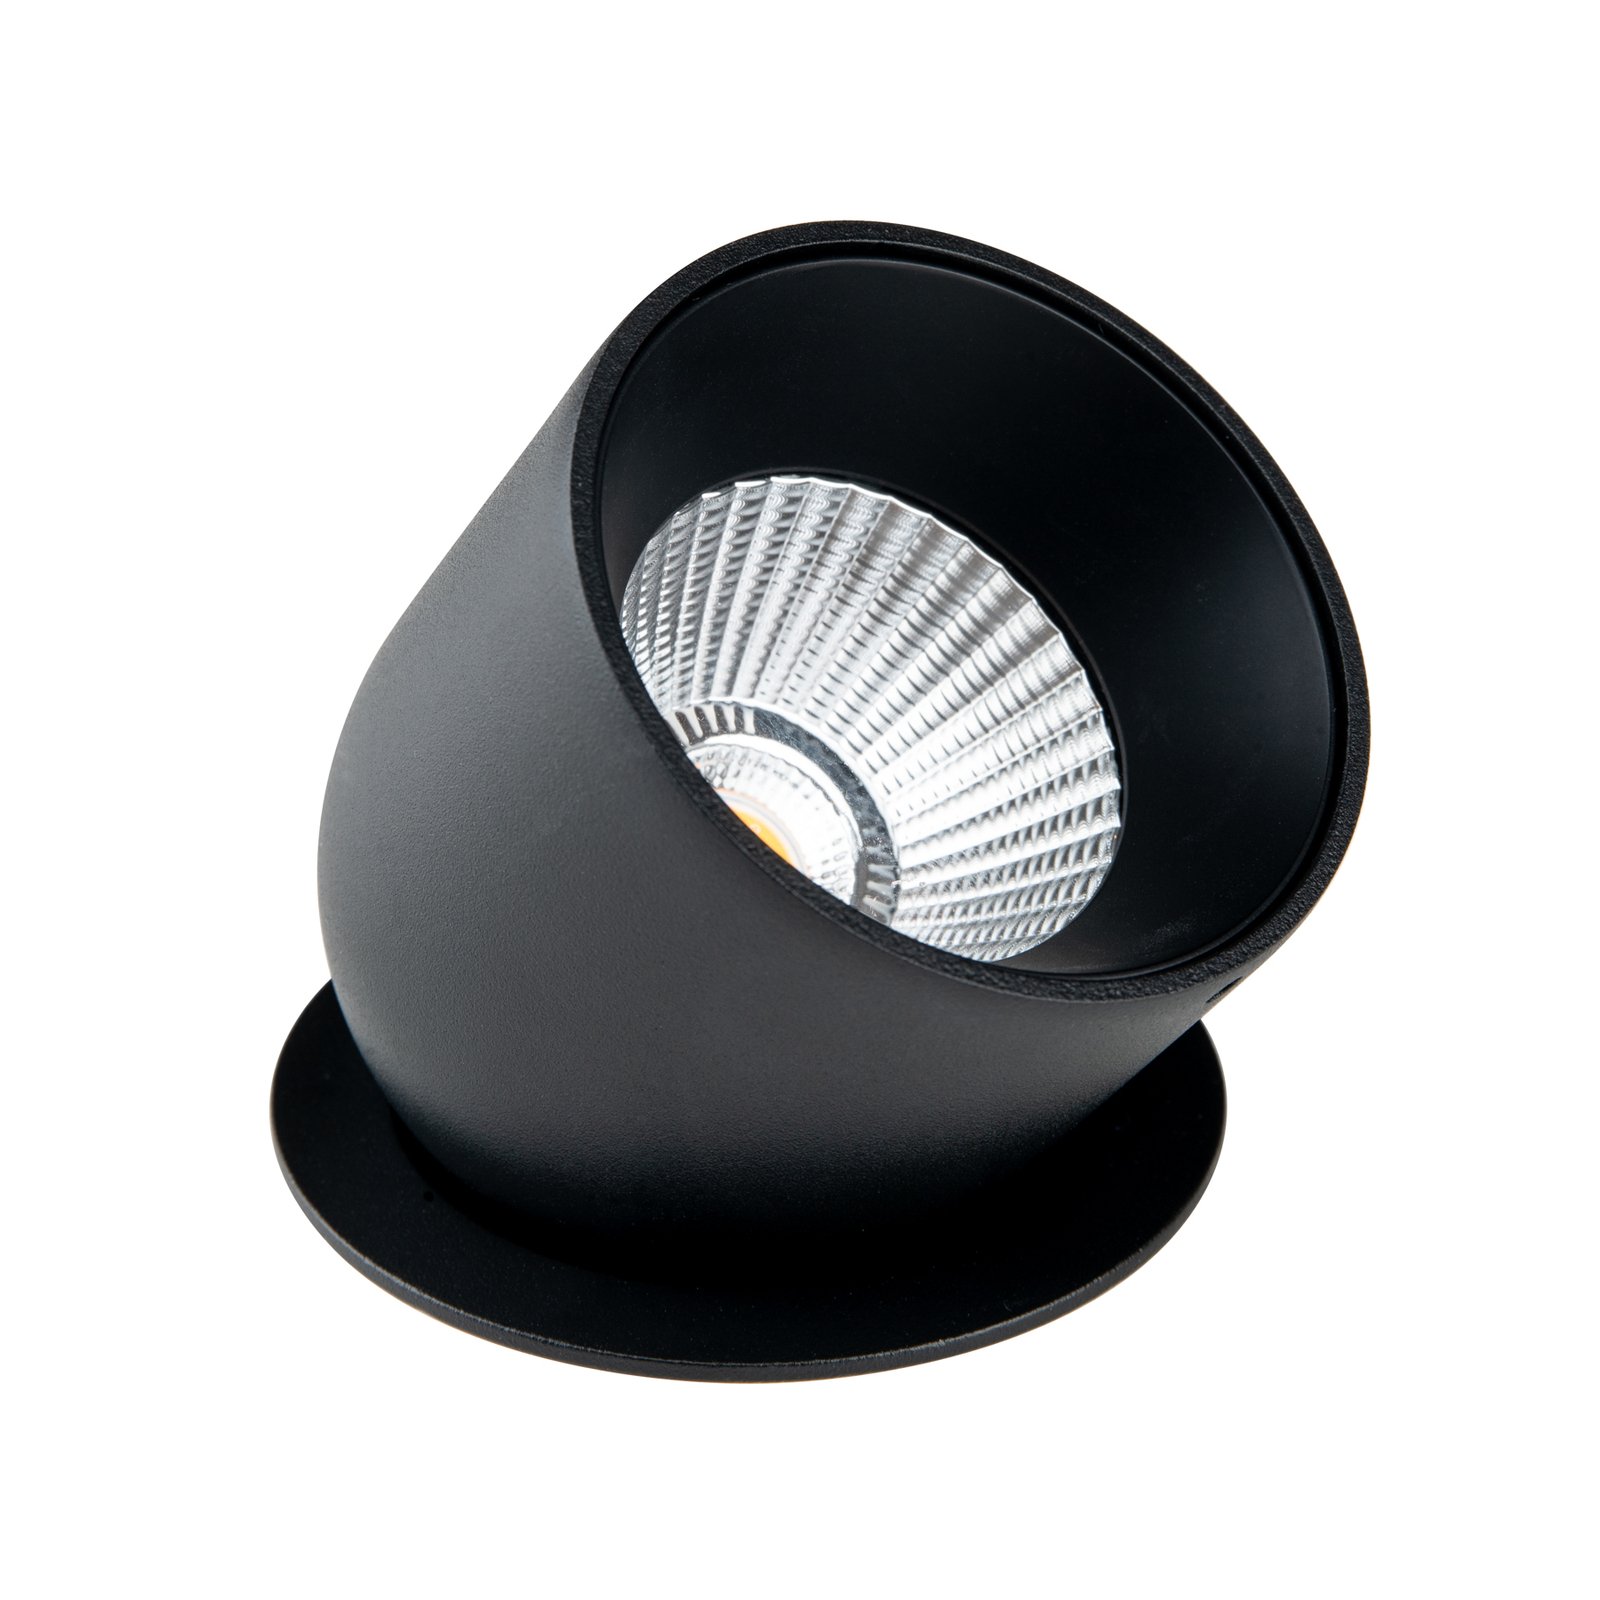 SLC Innenring Cup for downlight Cup, black